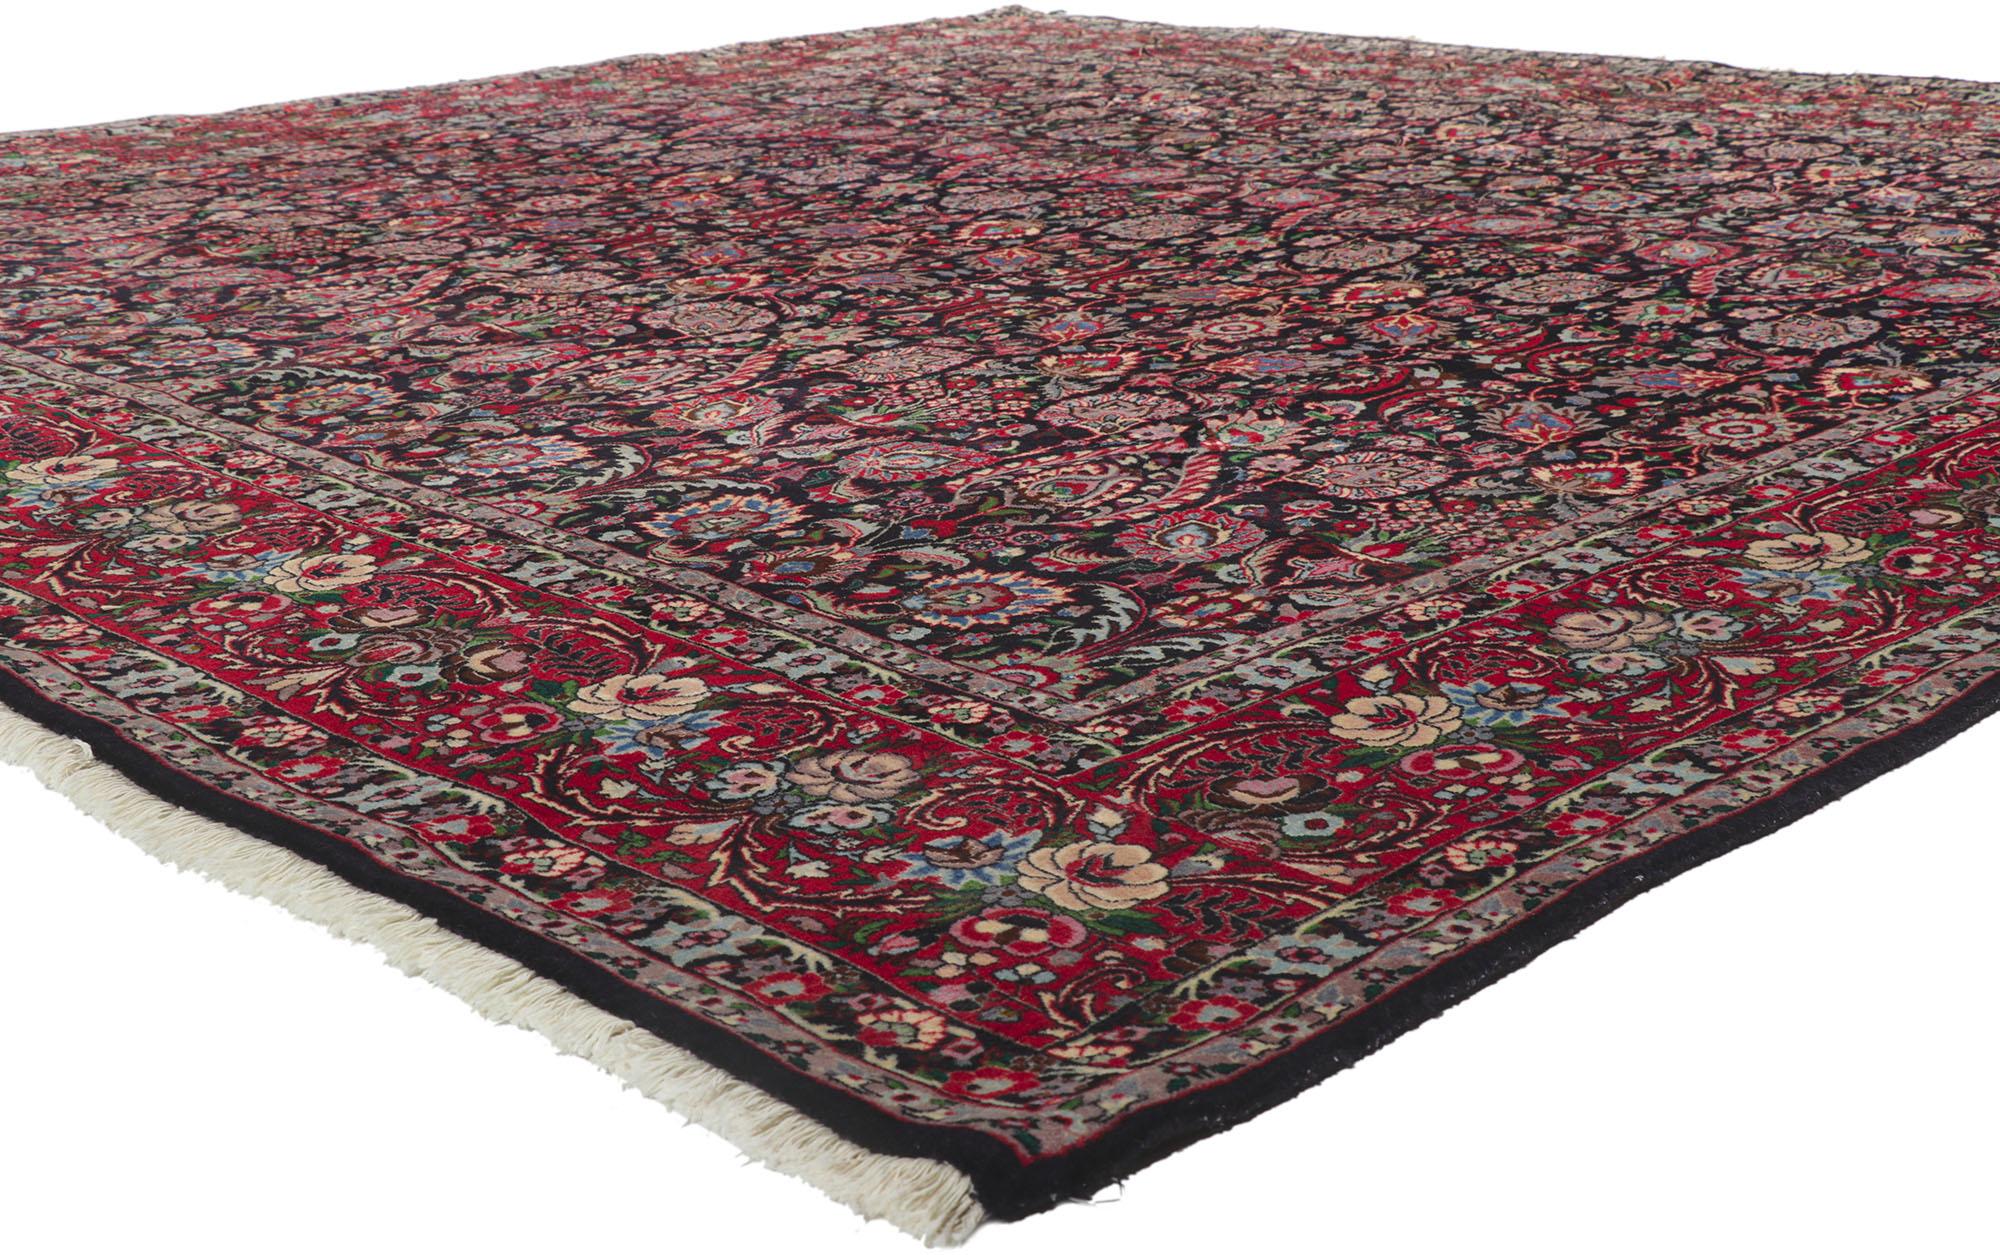 78161 Vintage Persian Tekab Bijar Rug with All-Over Design 09'11 x 10'01. With its dark, yet vibrant color palette and ornamental details, this hand knotted wool vintage Persian Tekab Bijar rug beautifully embodies early Victorian style. The